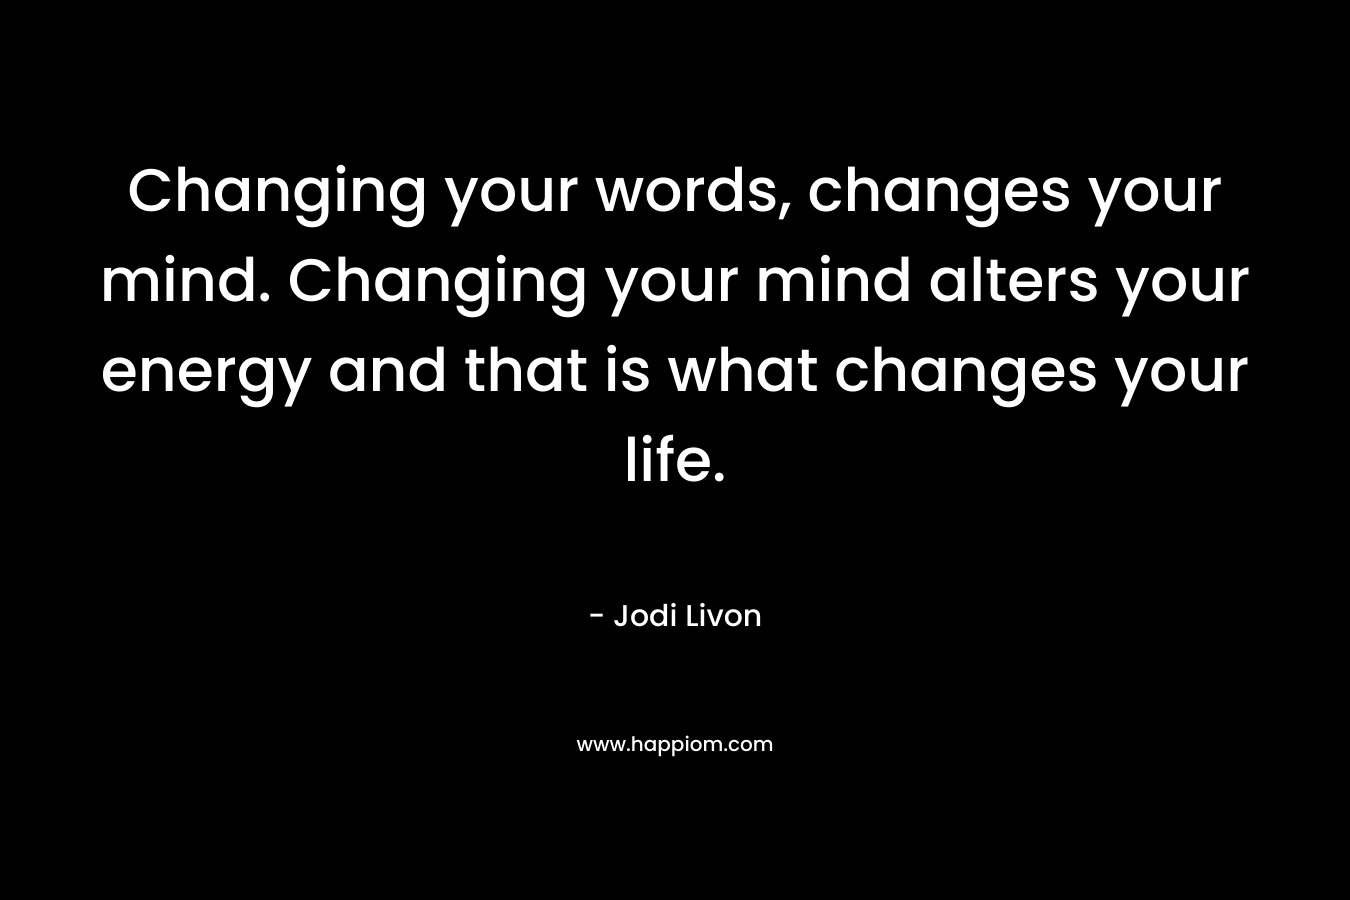 Changing your words, changes your mind. Changing your mind alters your energy and that is what changes your life.